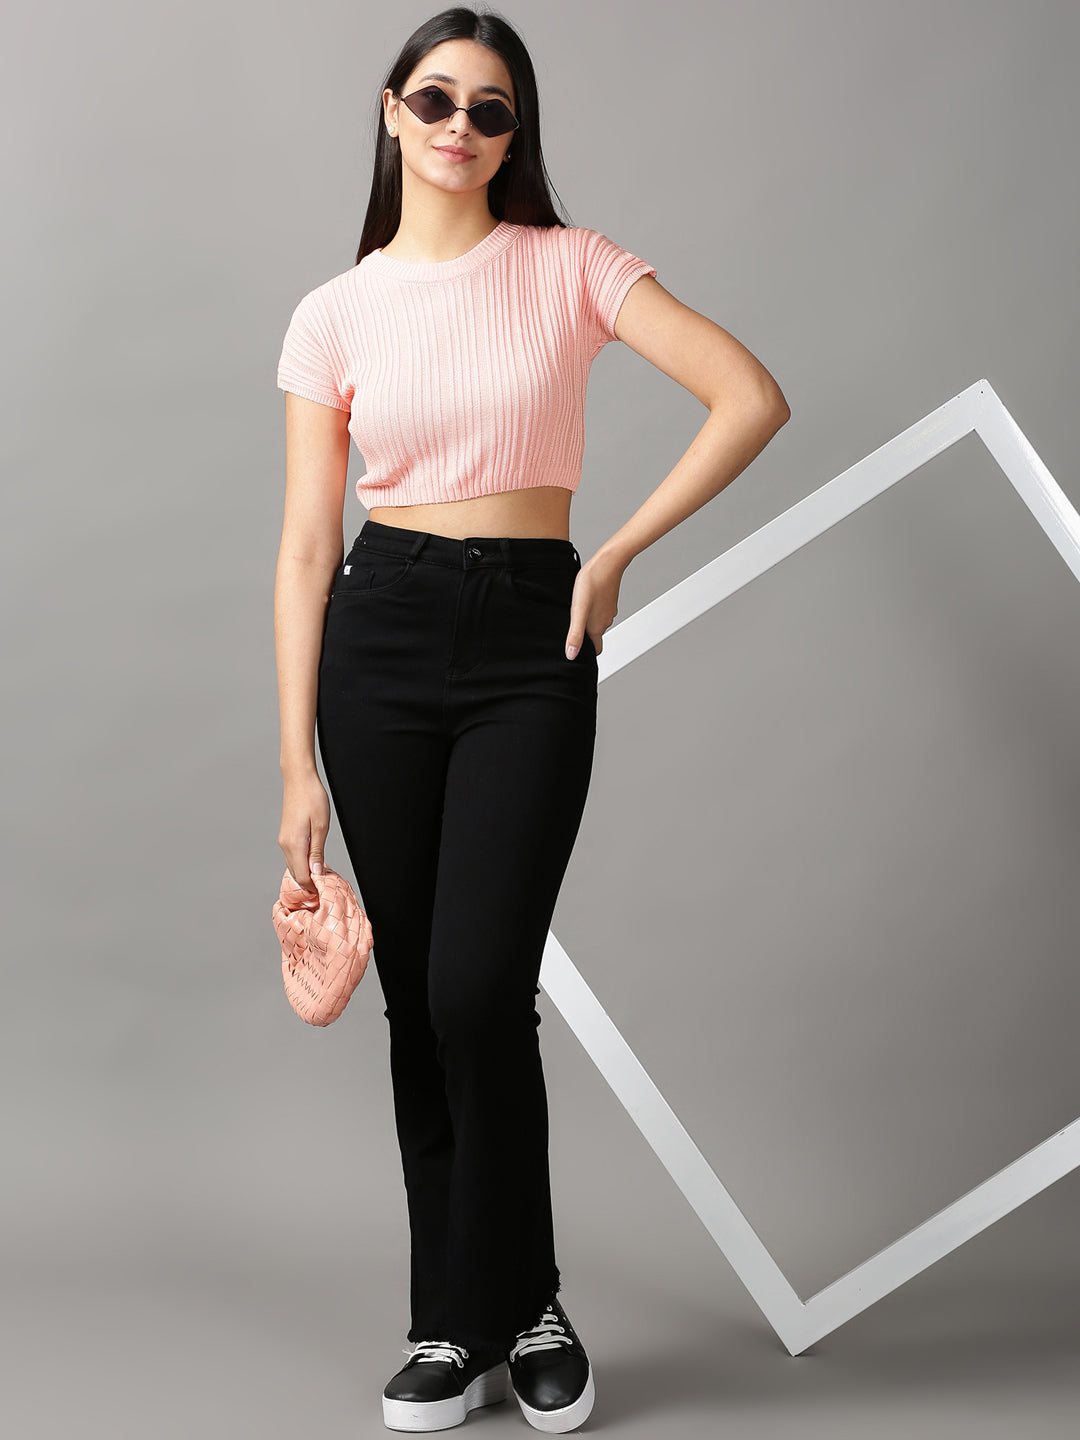 Women's Peach Solid Fitted Crop Top